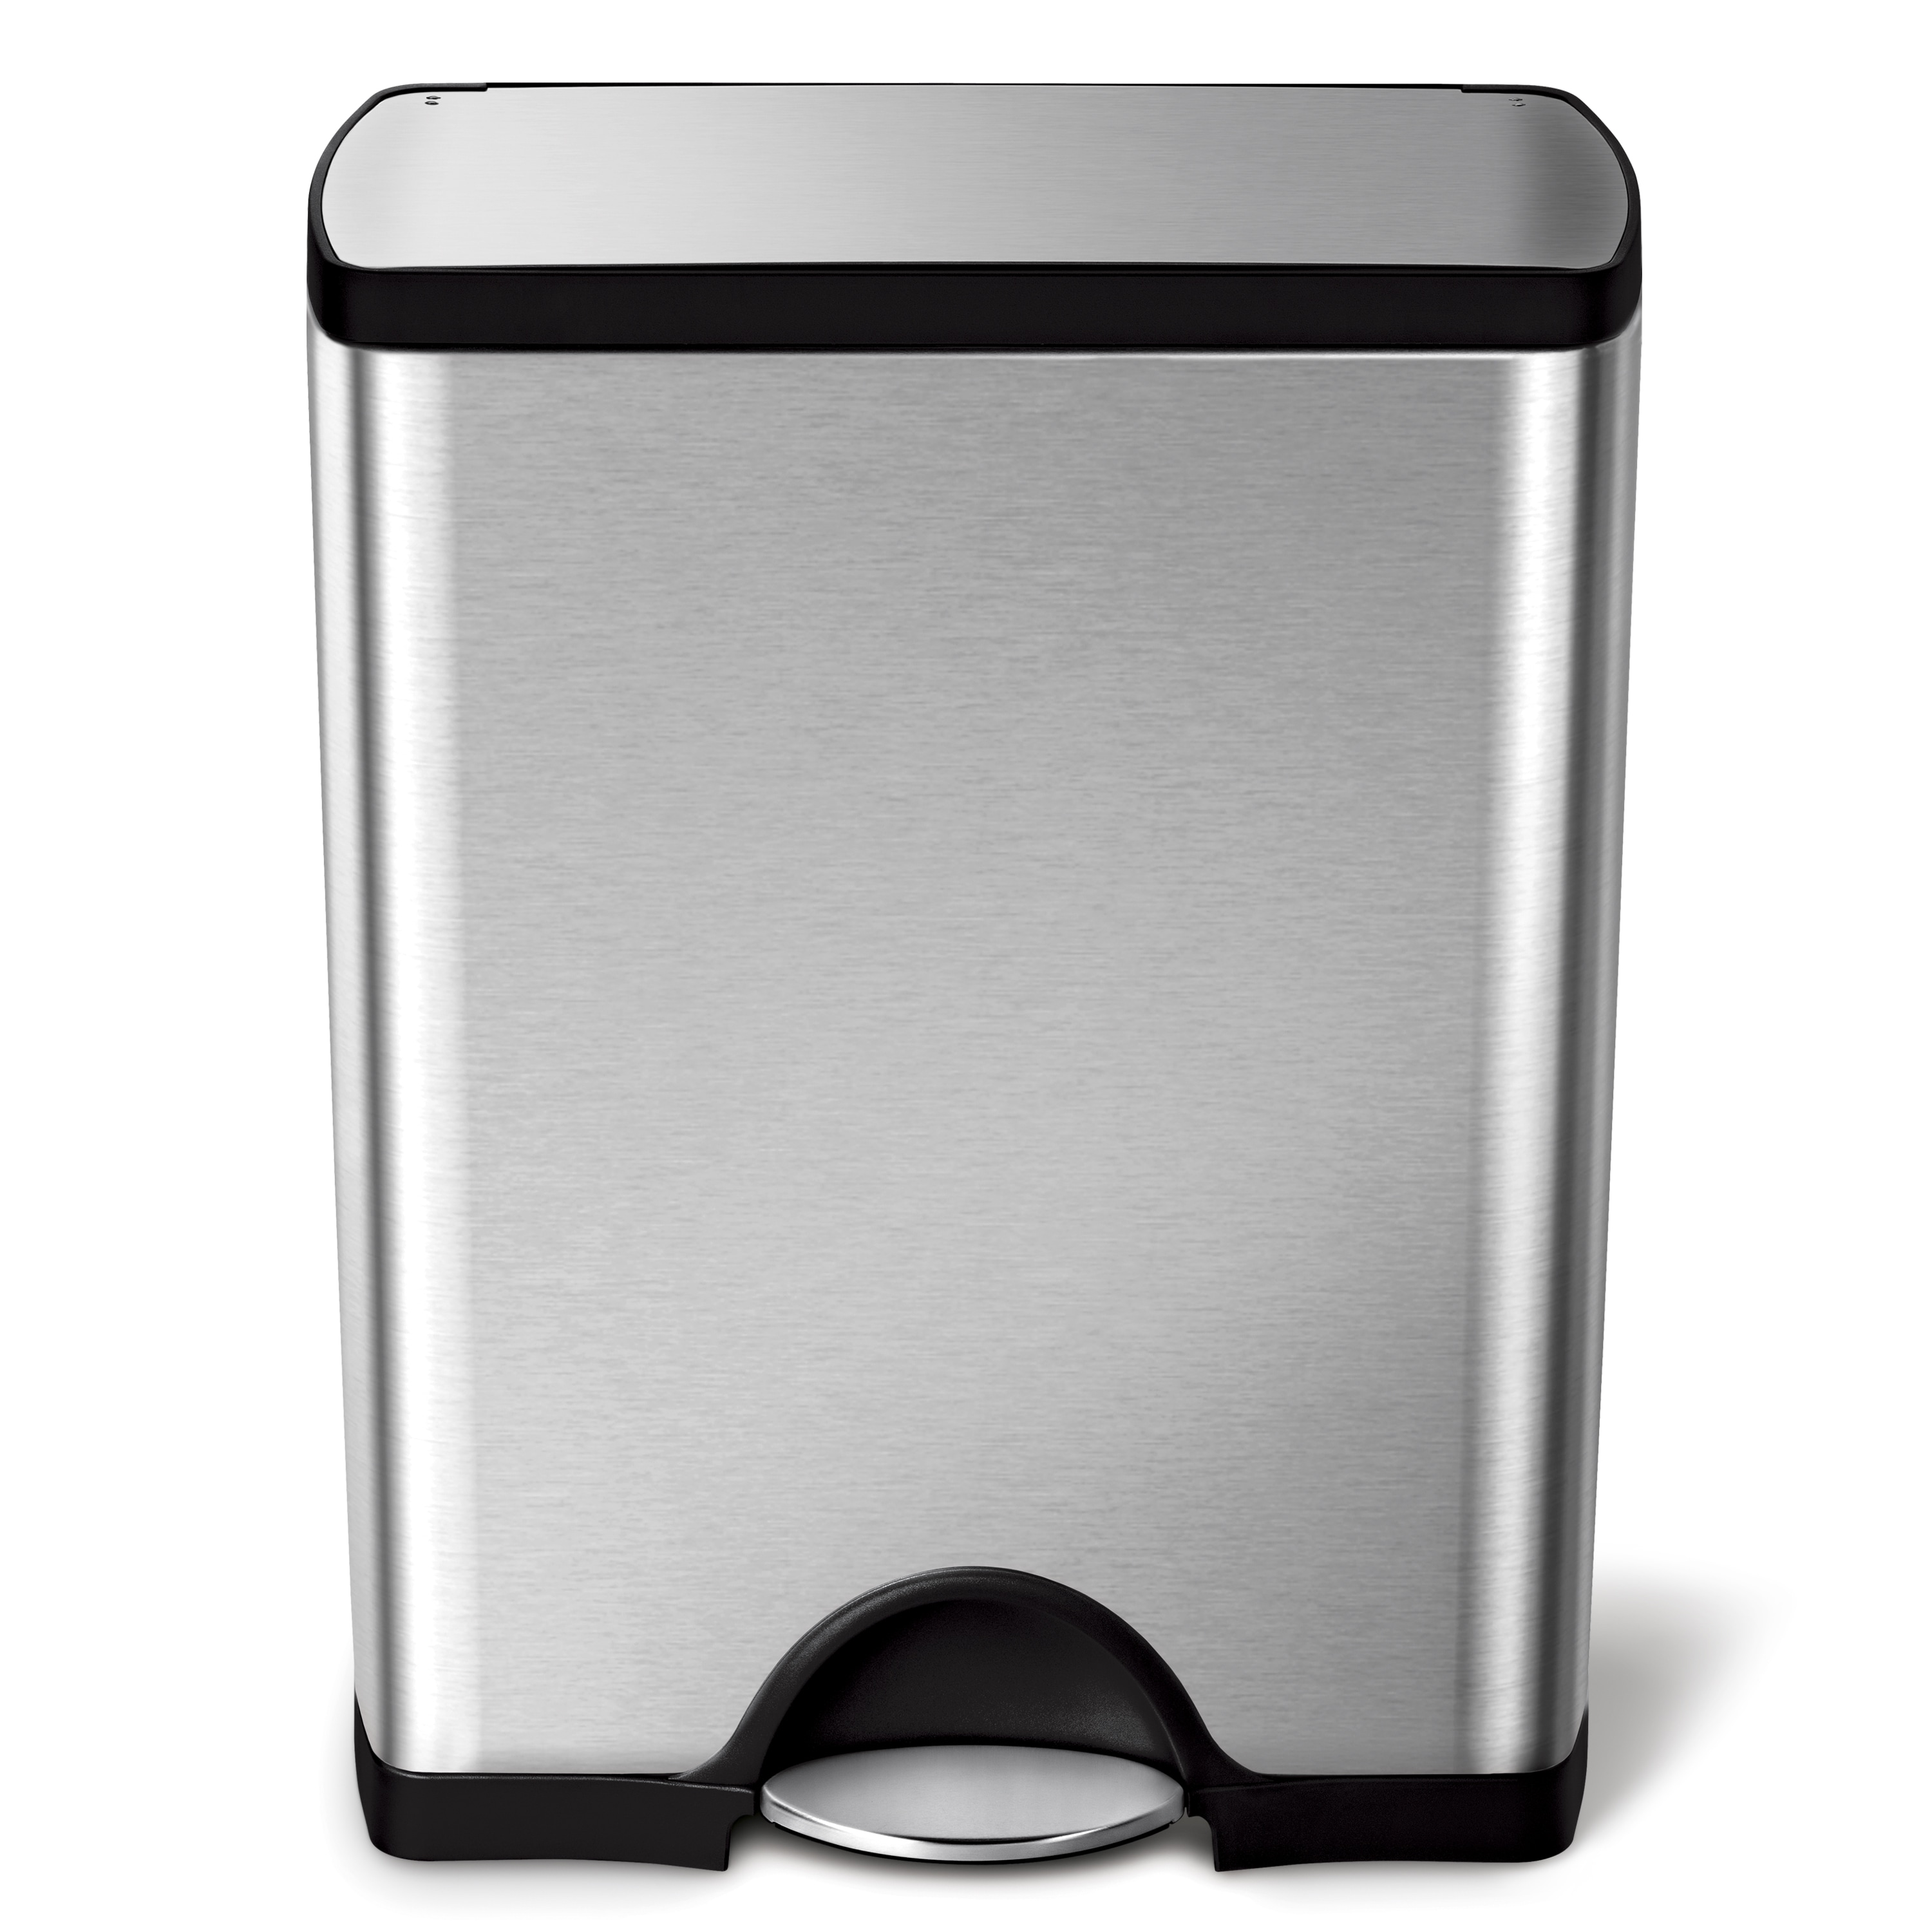 Simplehuman Trash Can Is Worth More Than $50: Review